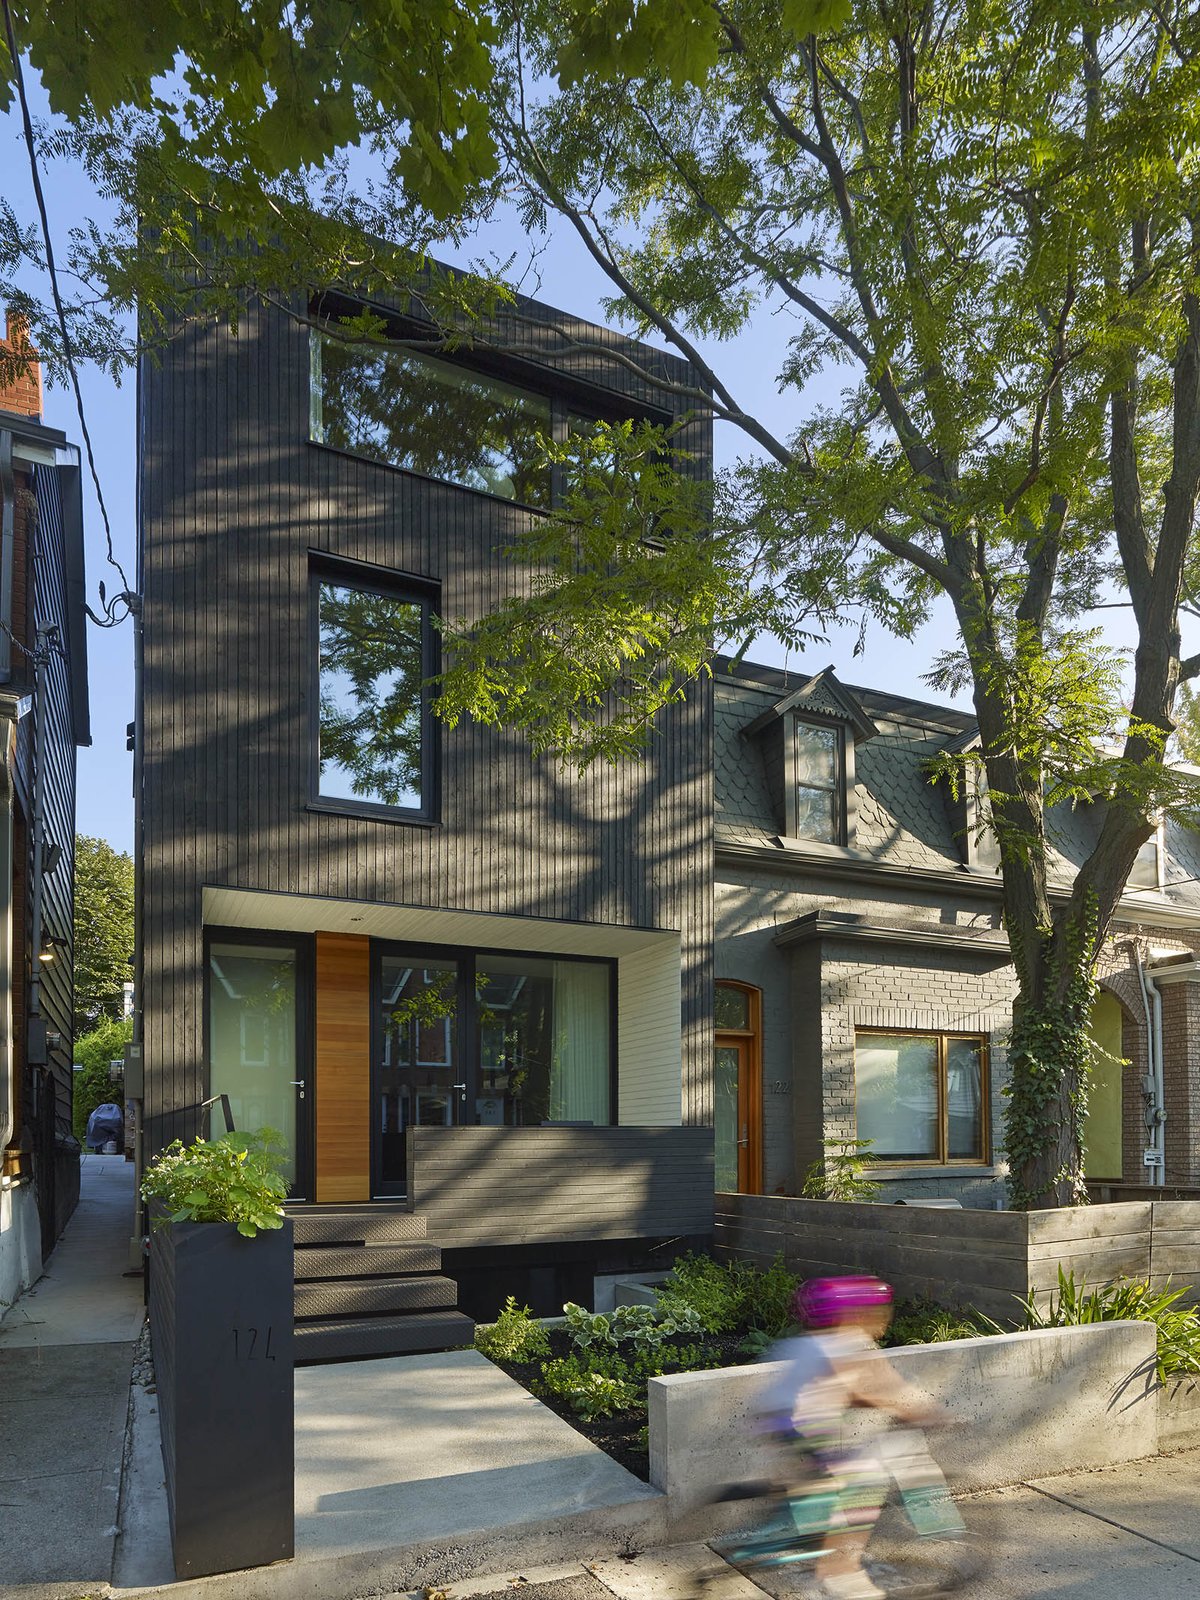 The all-black exterior cladding creates a quiet pause in the streetscape. By day, it acts as an abstract canvas for shadow play from the boulevard trees. By night, it has the quality of an austere lantern.